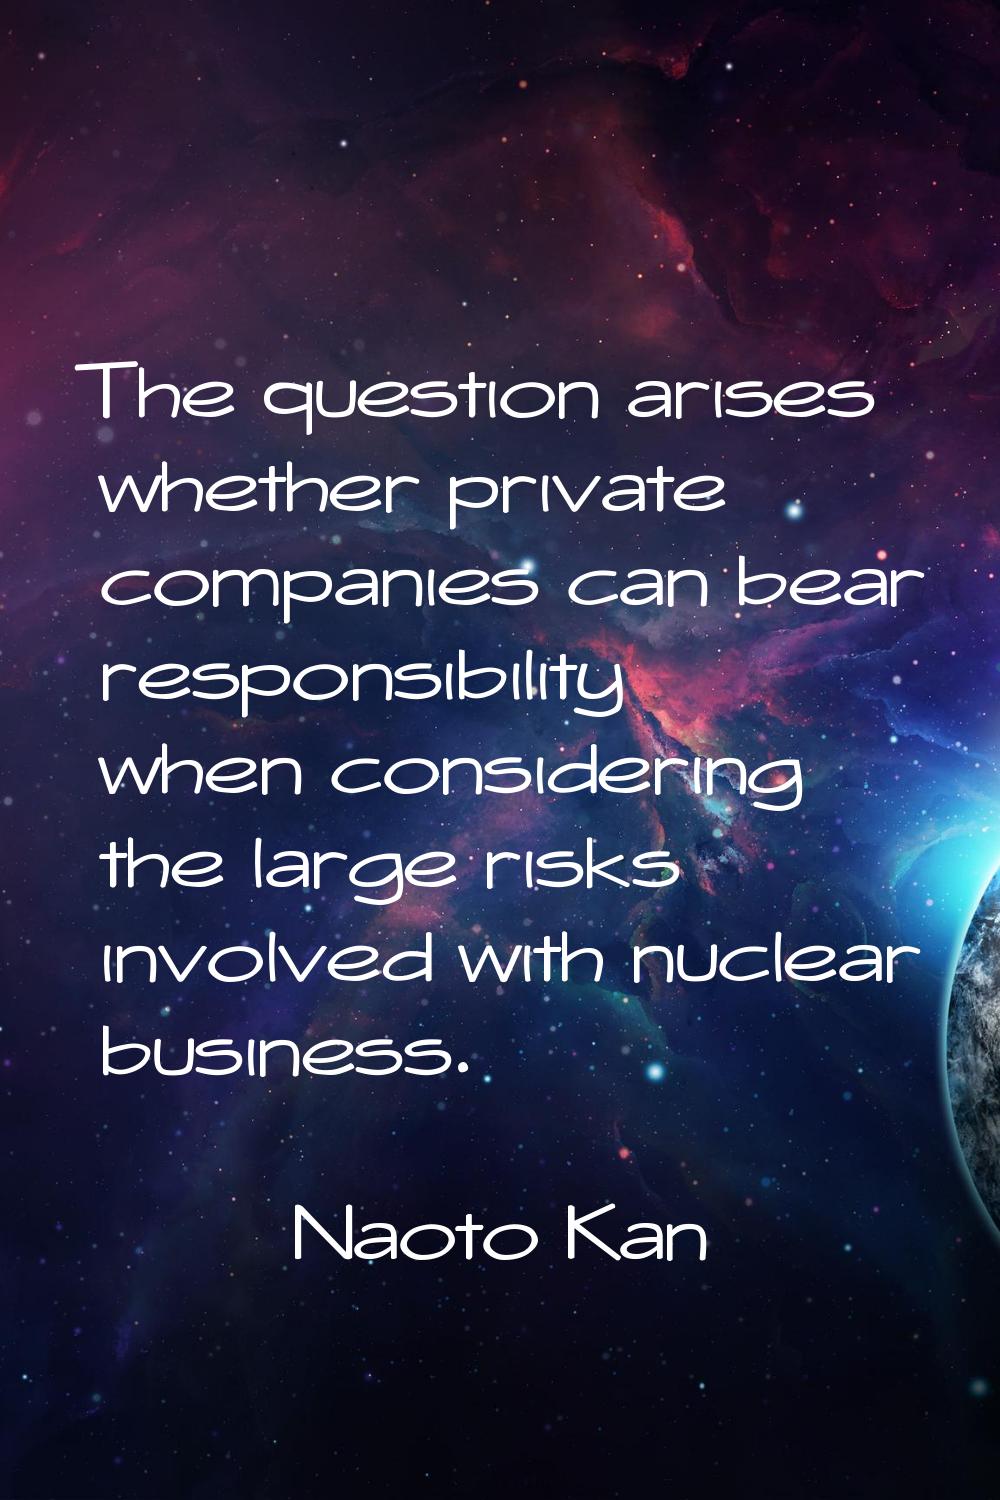 The question arises whether private companies can bear responsibility when considering the large ri